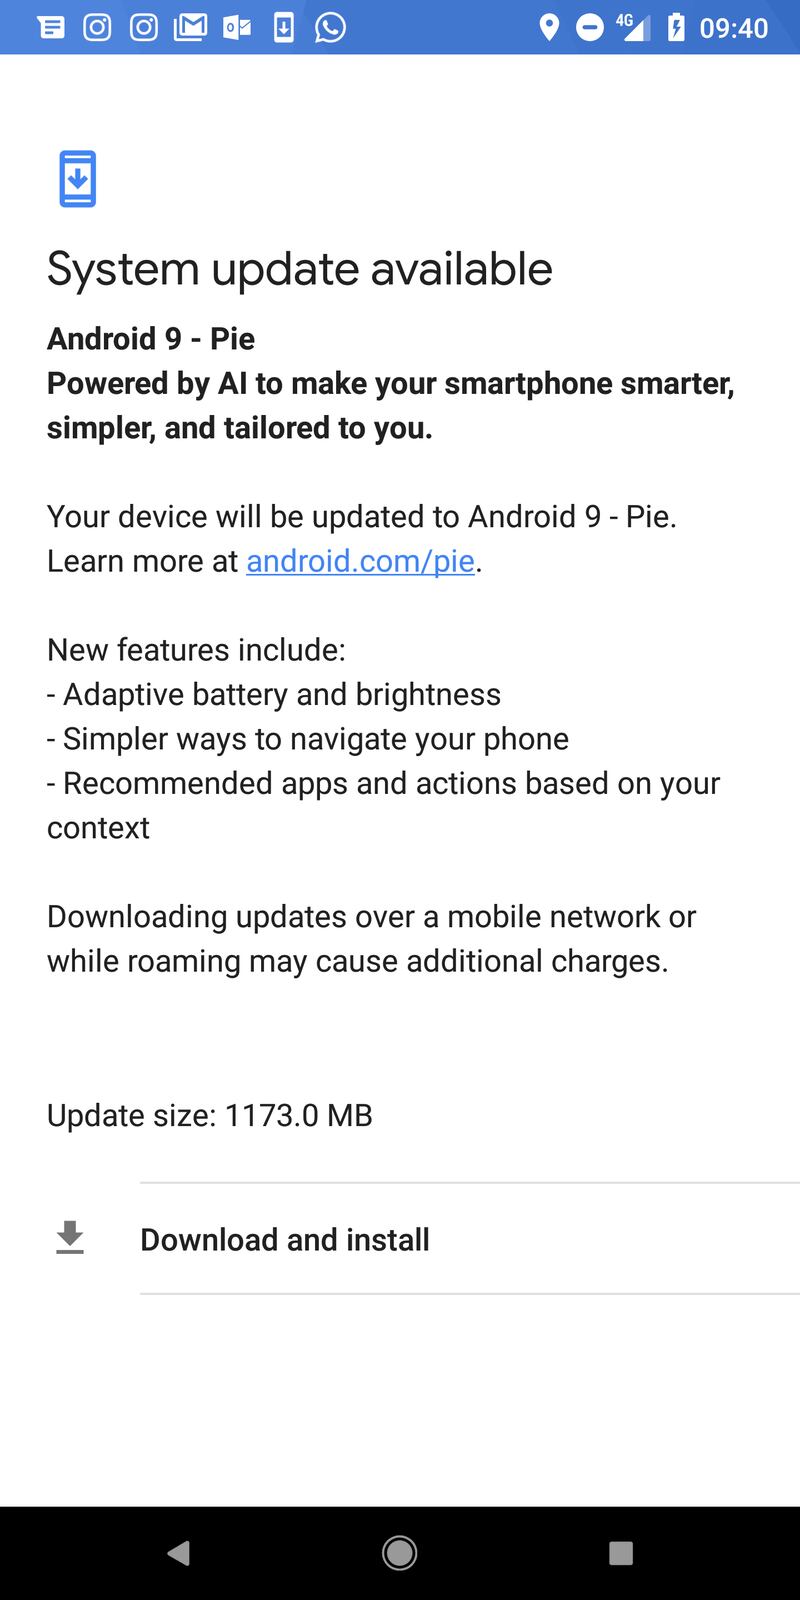 Download the latest Android Pie update.